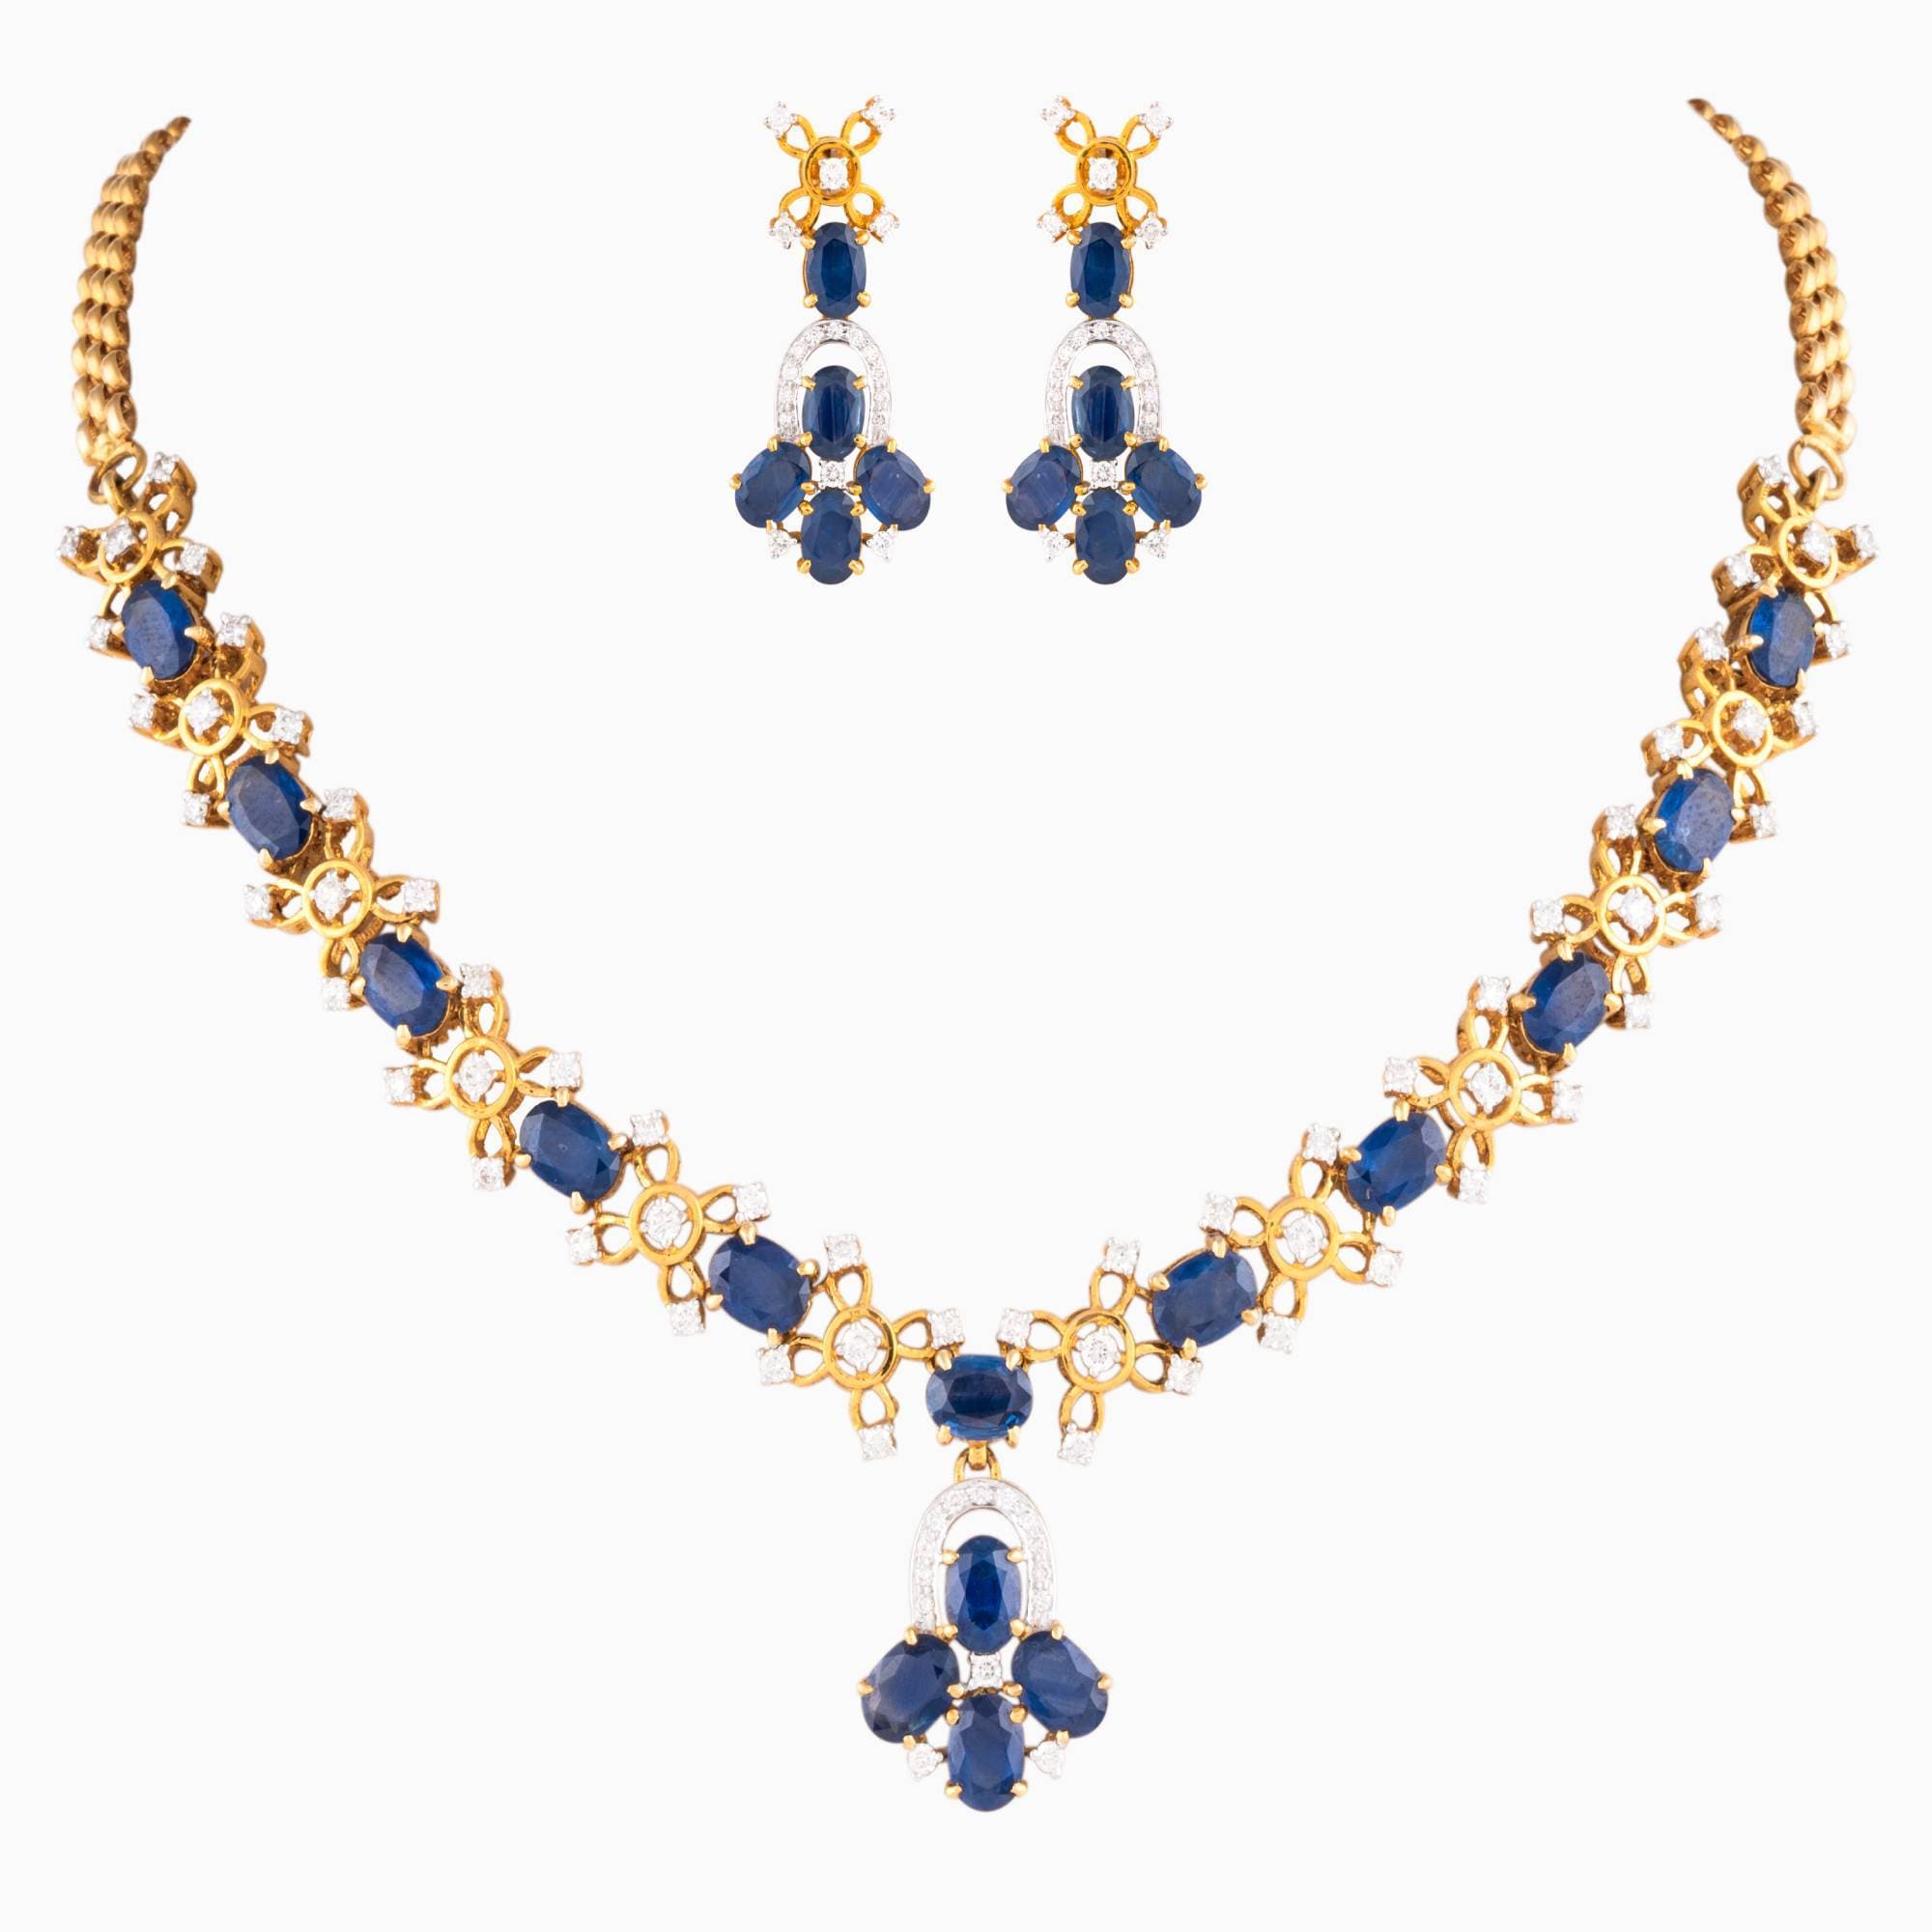 Necklace with Round Cut Diamond and Oval Cut Blue Sapphire -WDN865